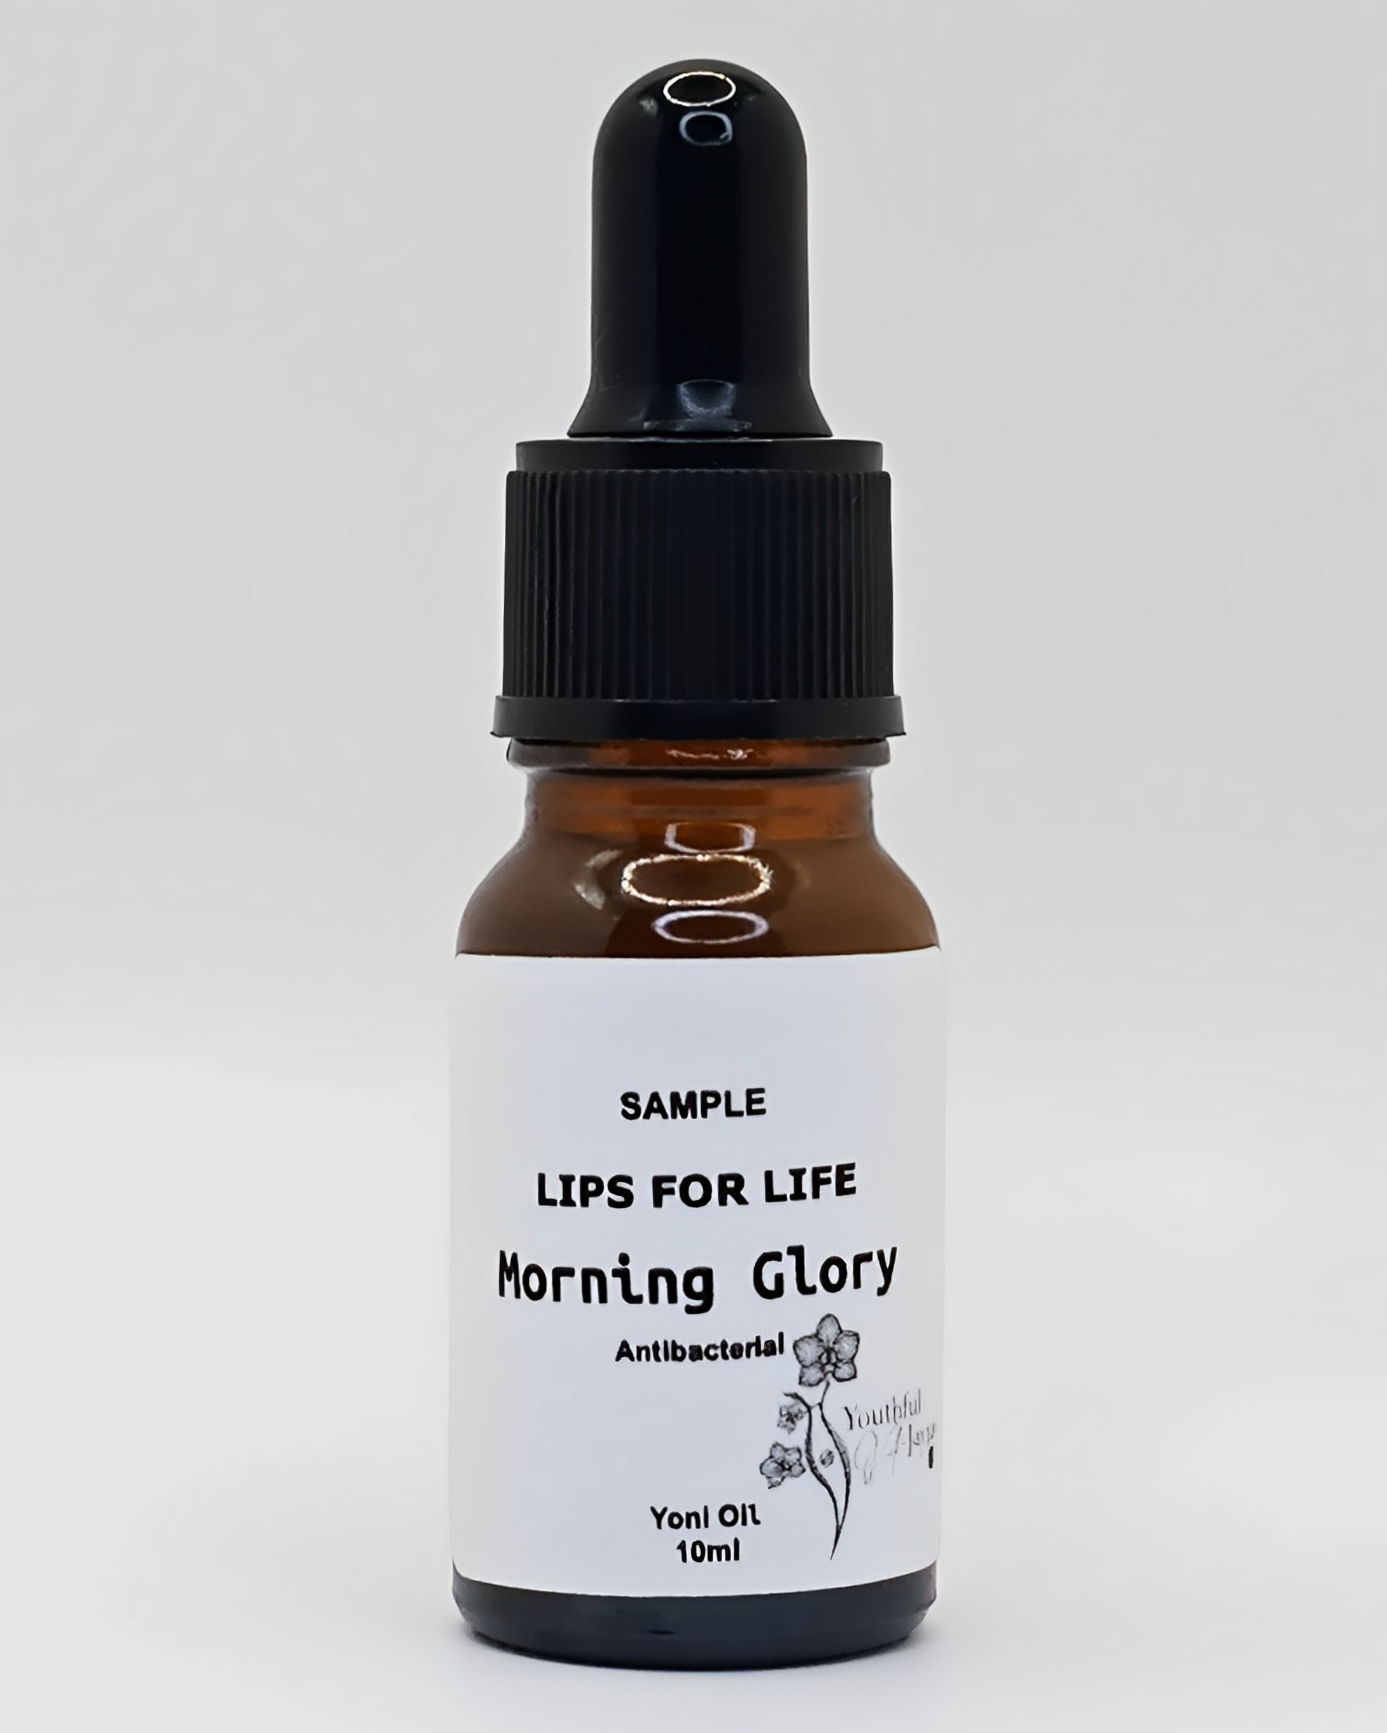 LIPS FOR LIFE: Morning Glory Yoni Oil- Organic, Handcrafted, Antibacterial, 2oz.